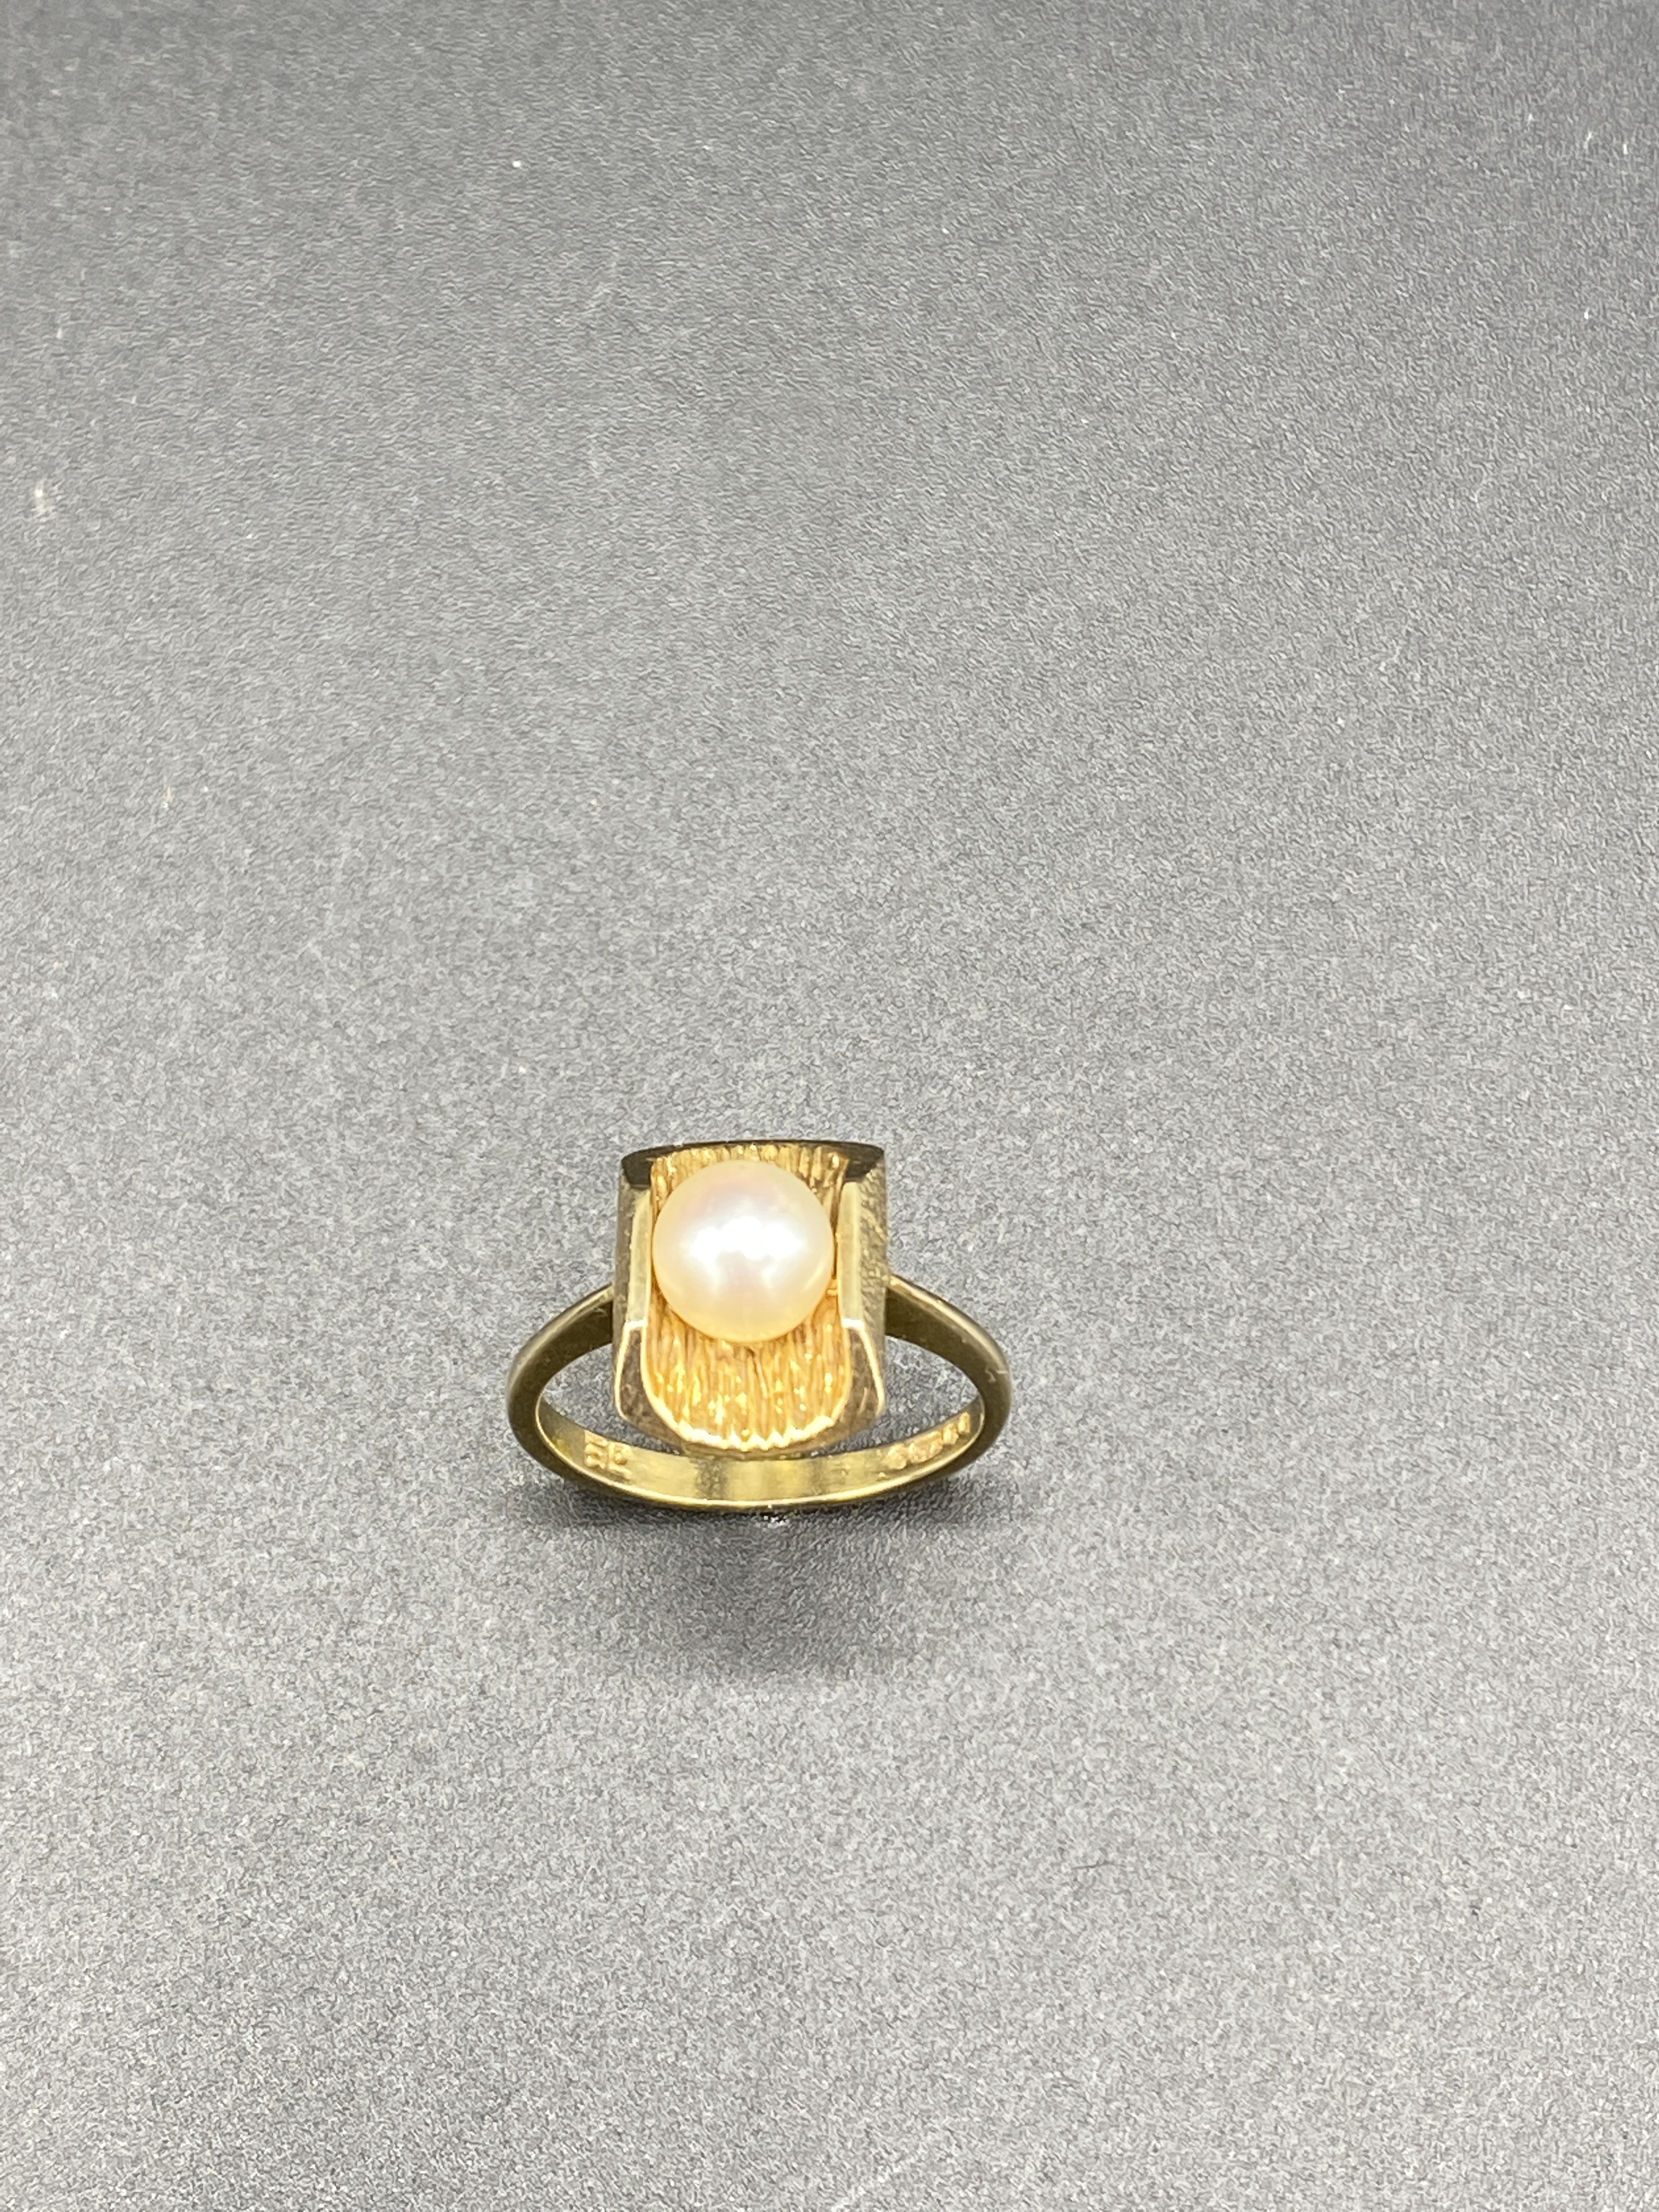 9ct gold ring set with a single pearl - Image 4 of 4